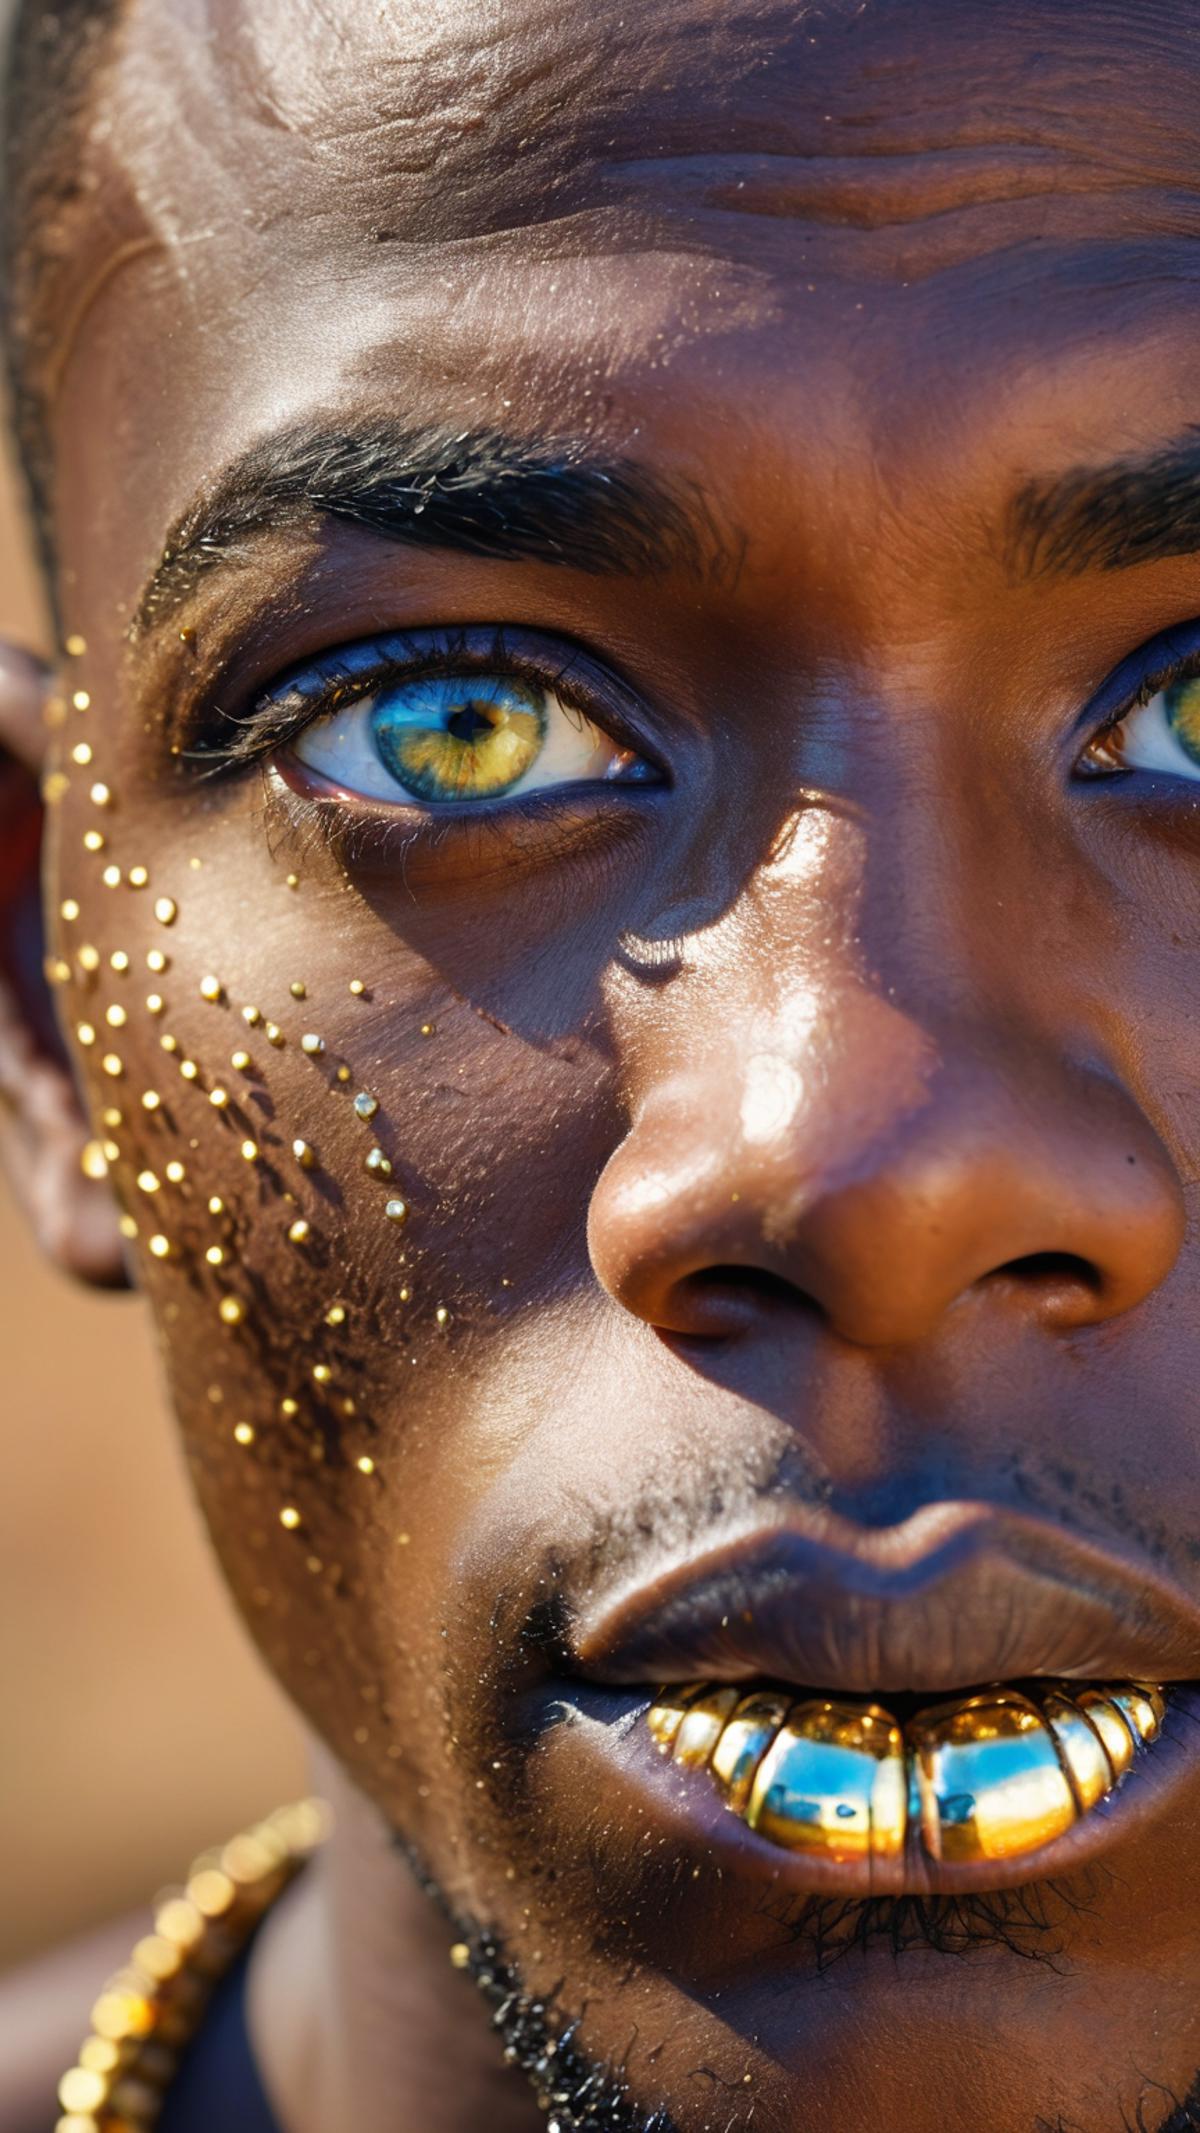 Man with Blue Eyes and Gold Makeup on Face